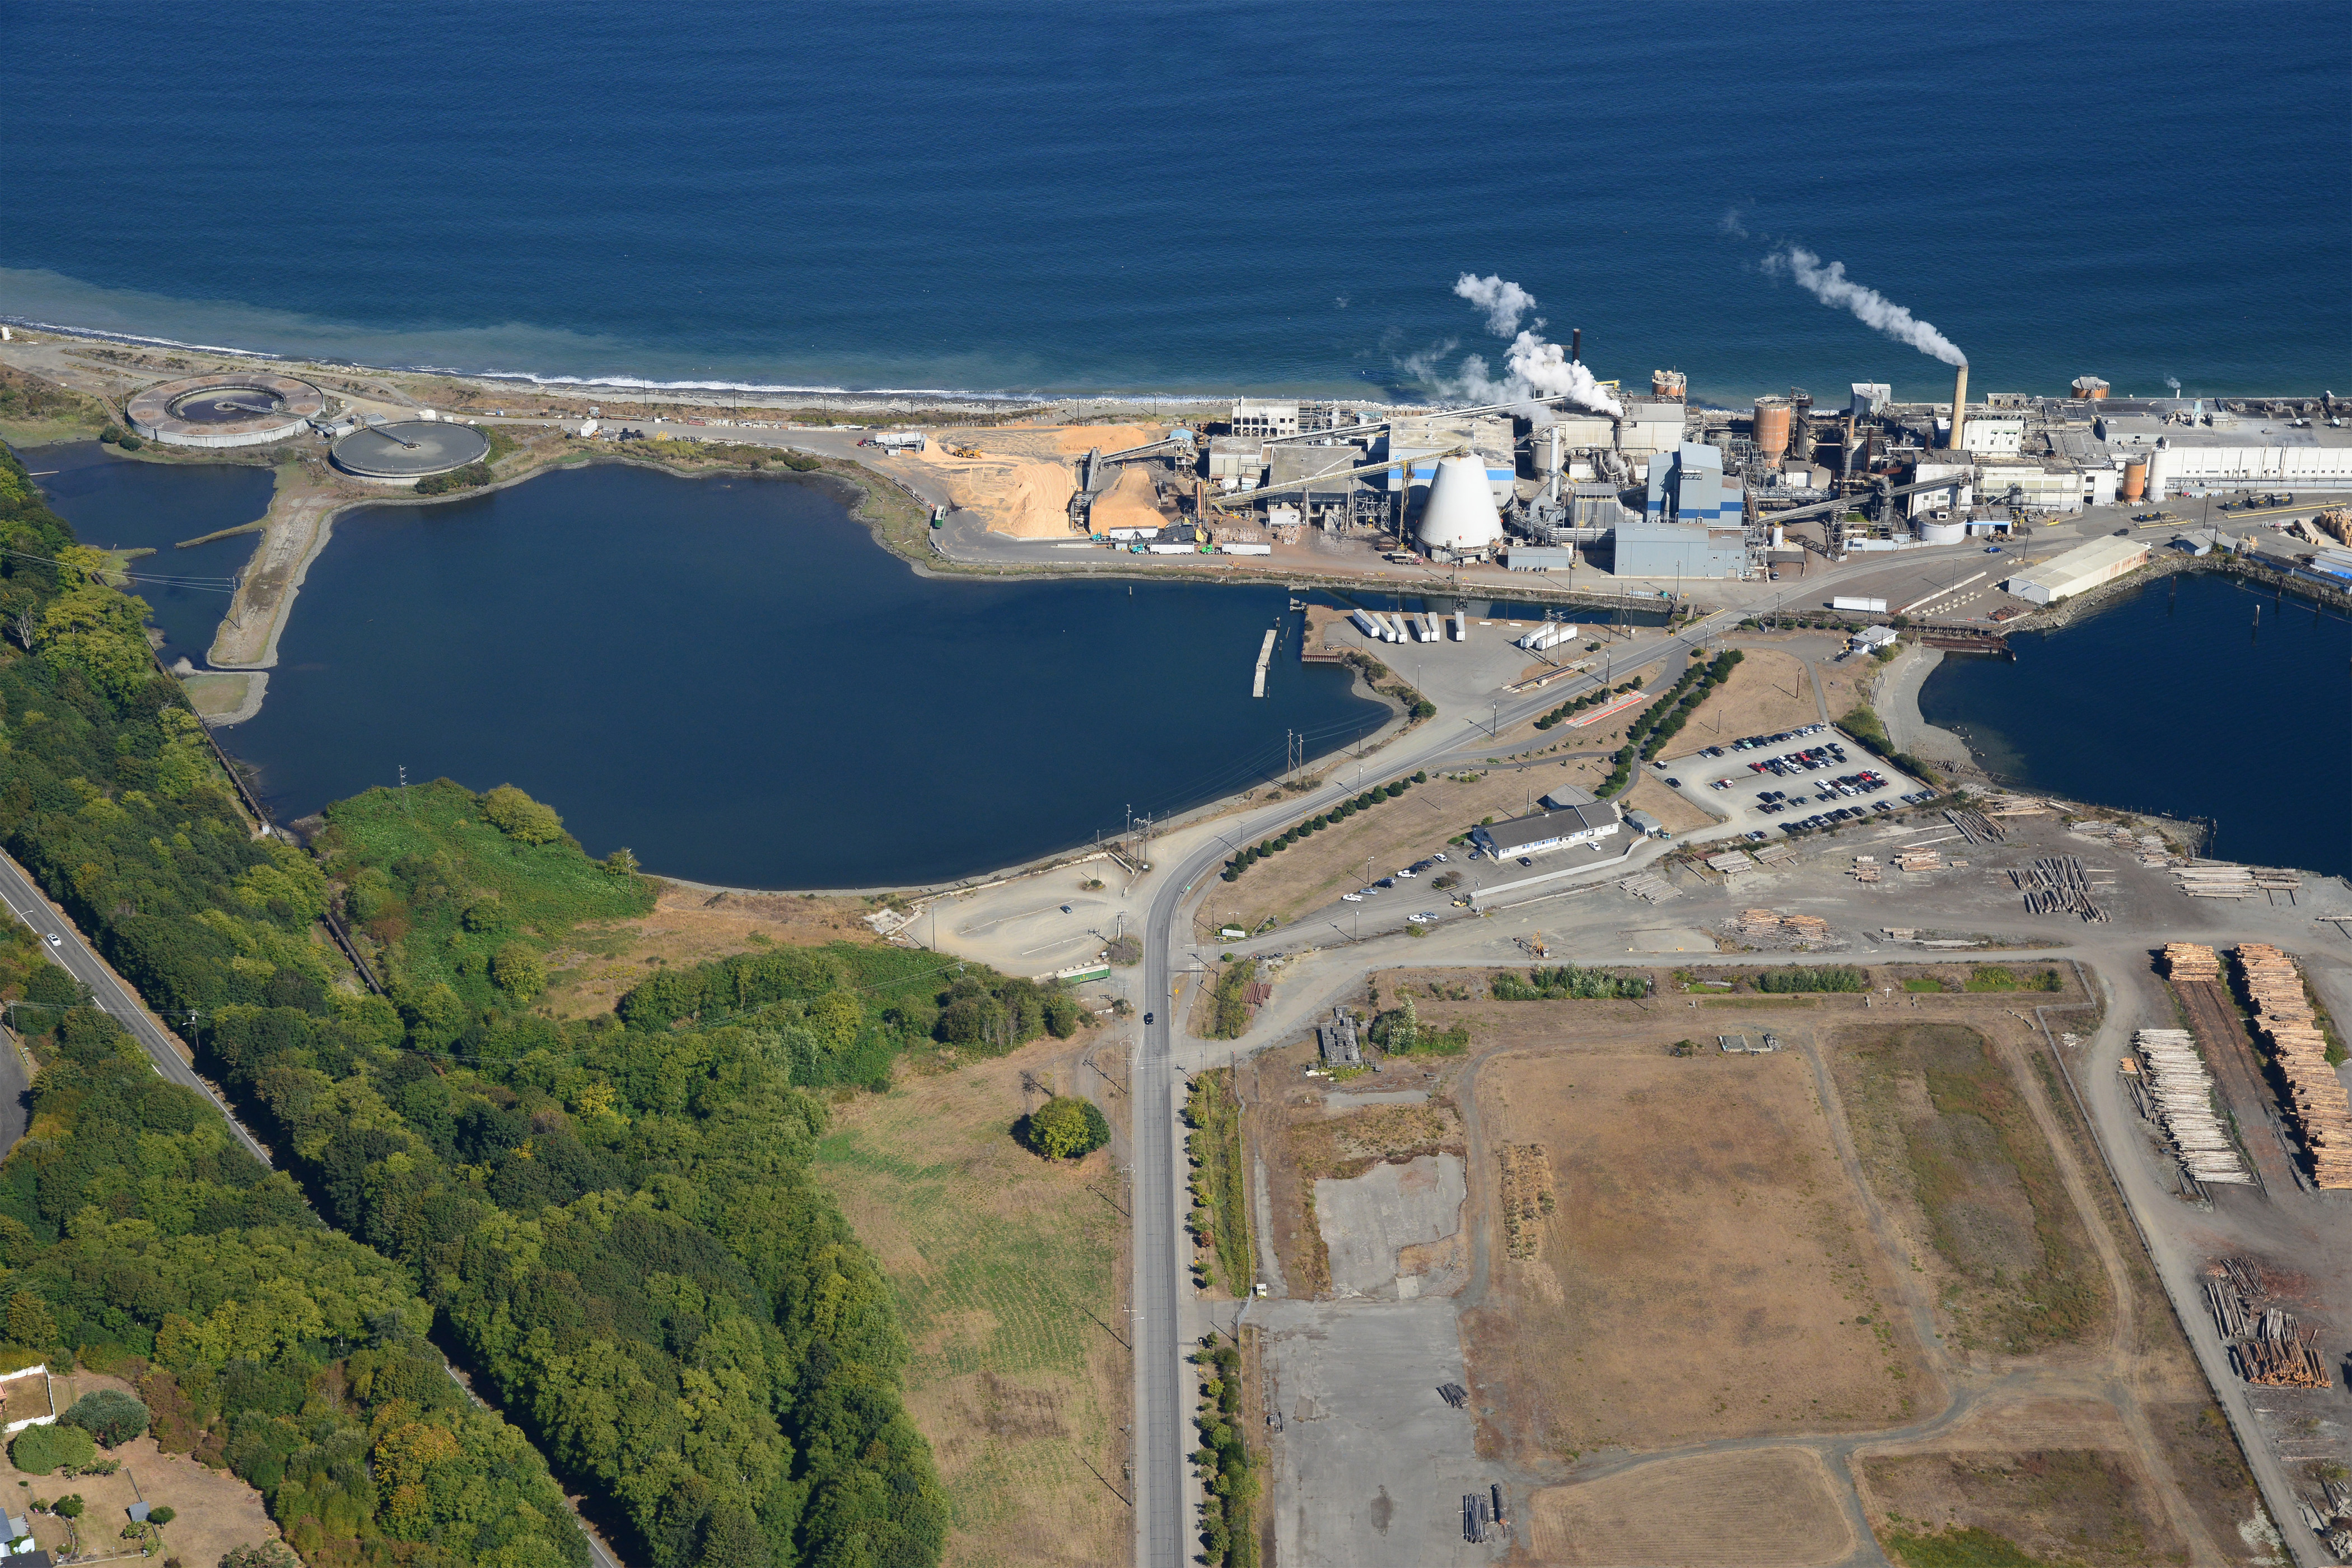 An aerial view of an industrial facility on the coast of Western Port Angeles Harbor.